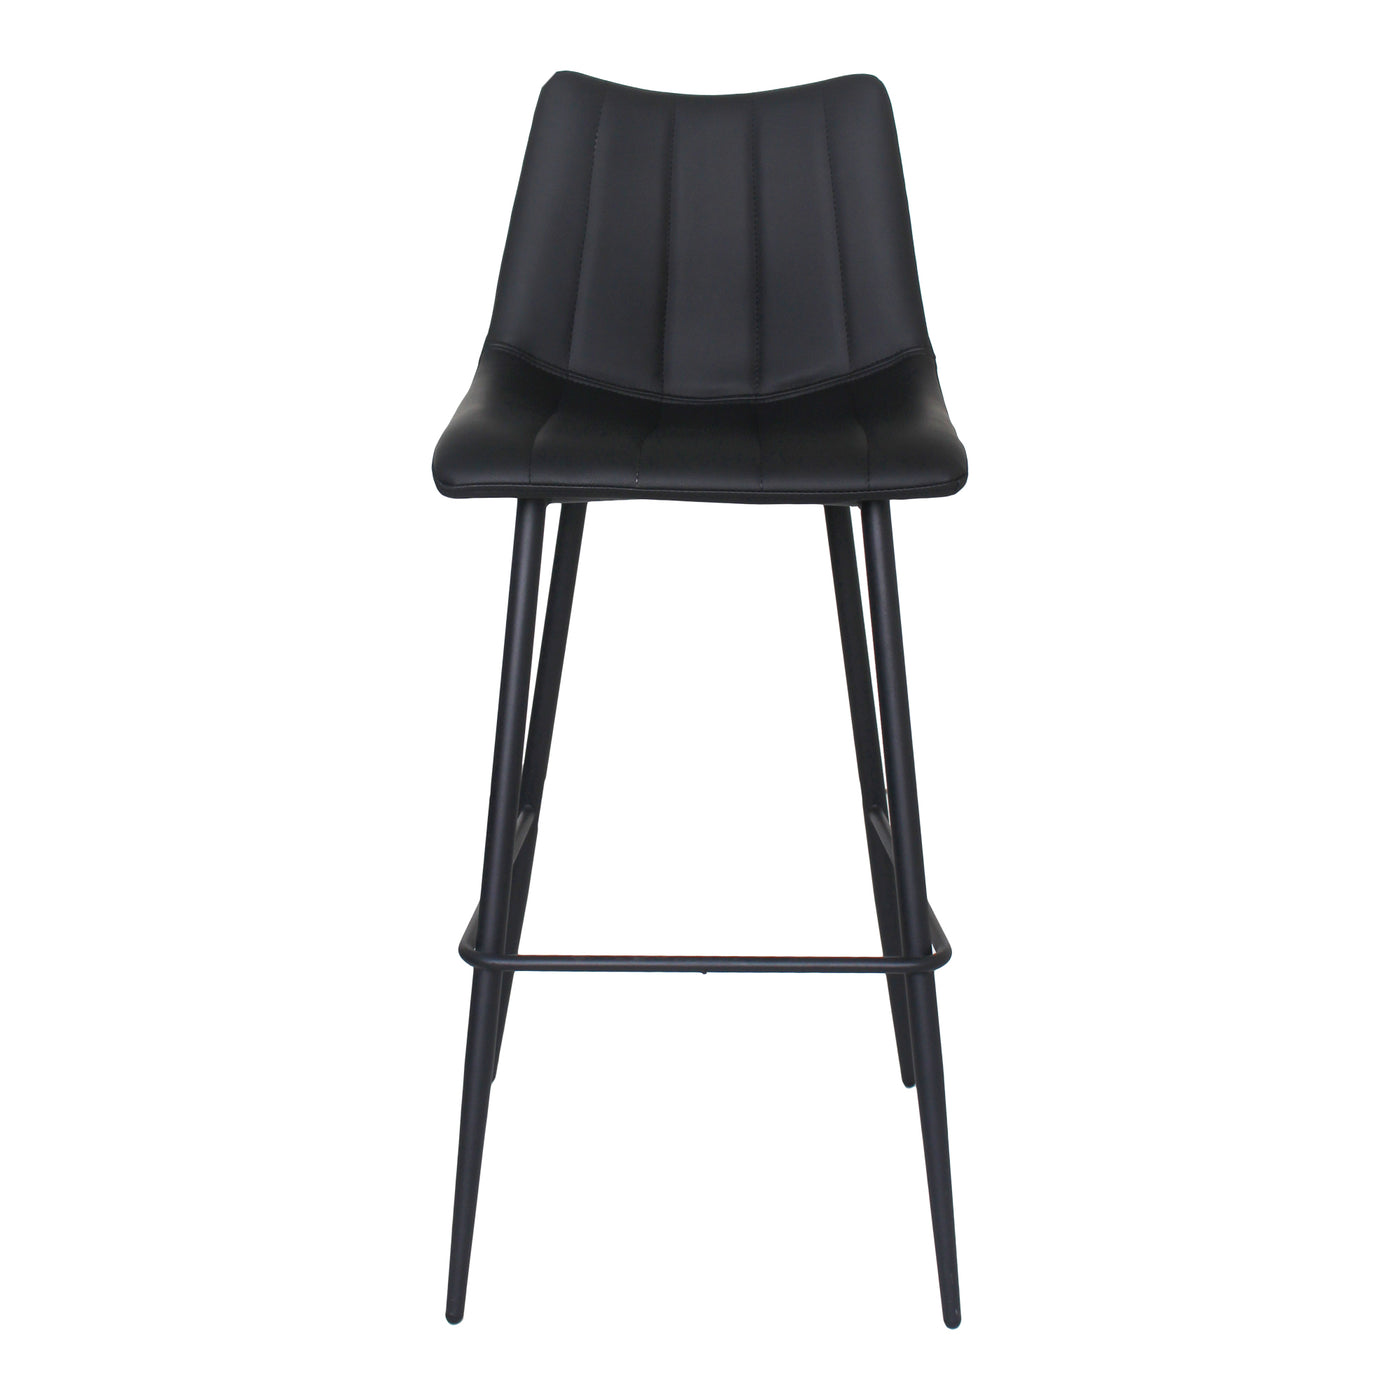 Contemporary modern barstools get a new take with this sleek aesthetic. The Alibi barstool features striking vertical line...